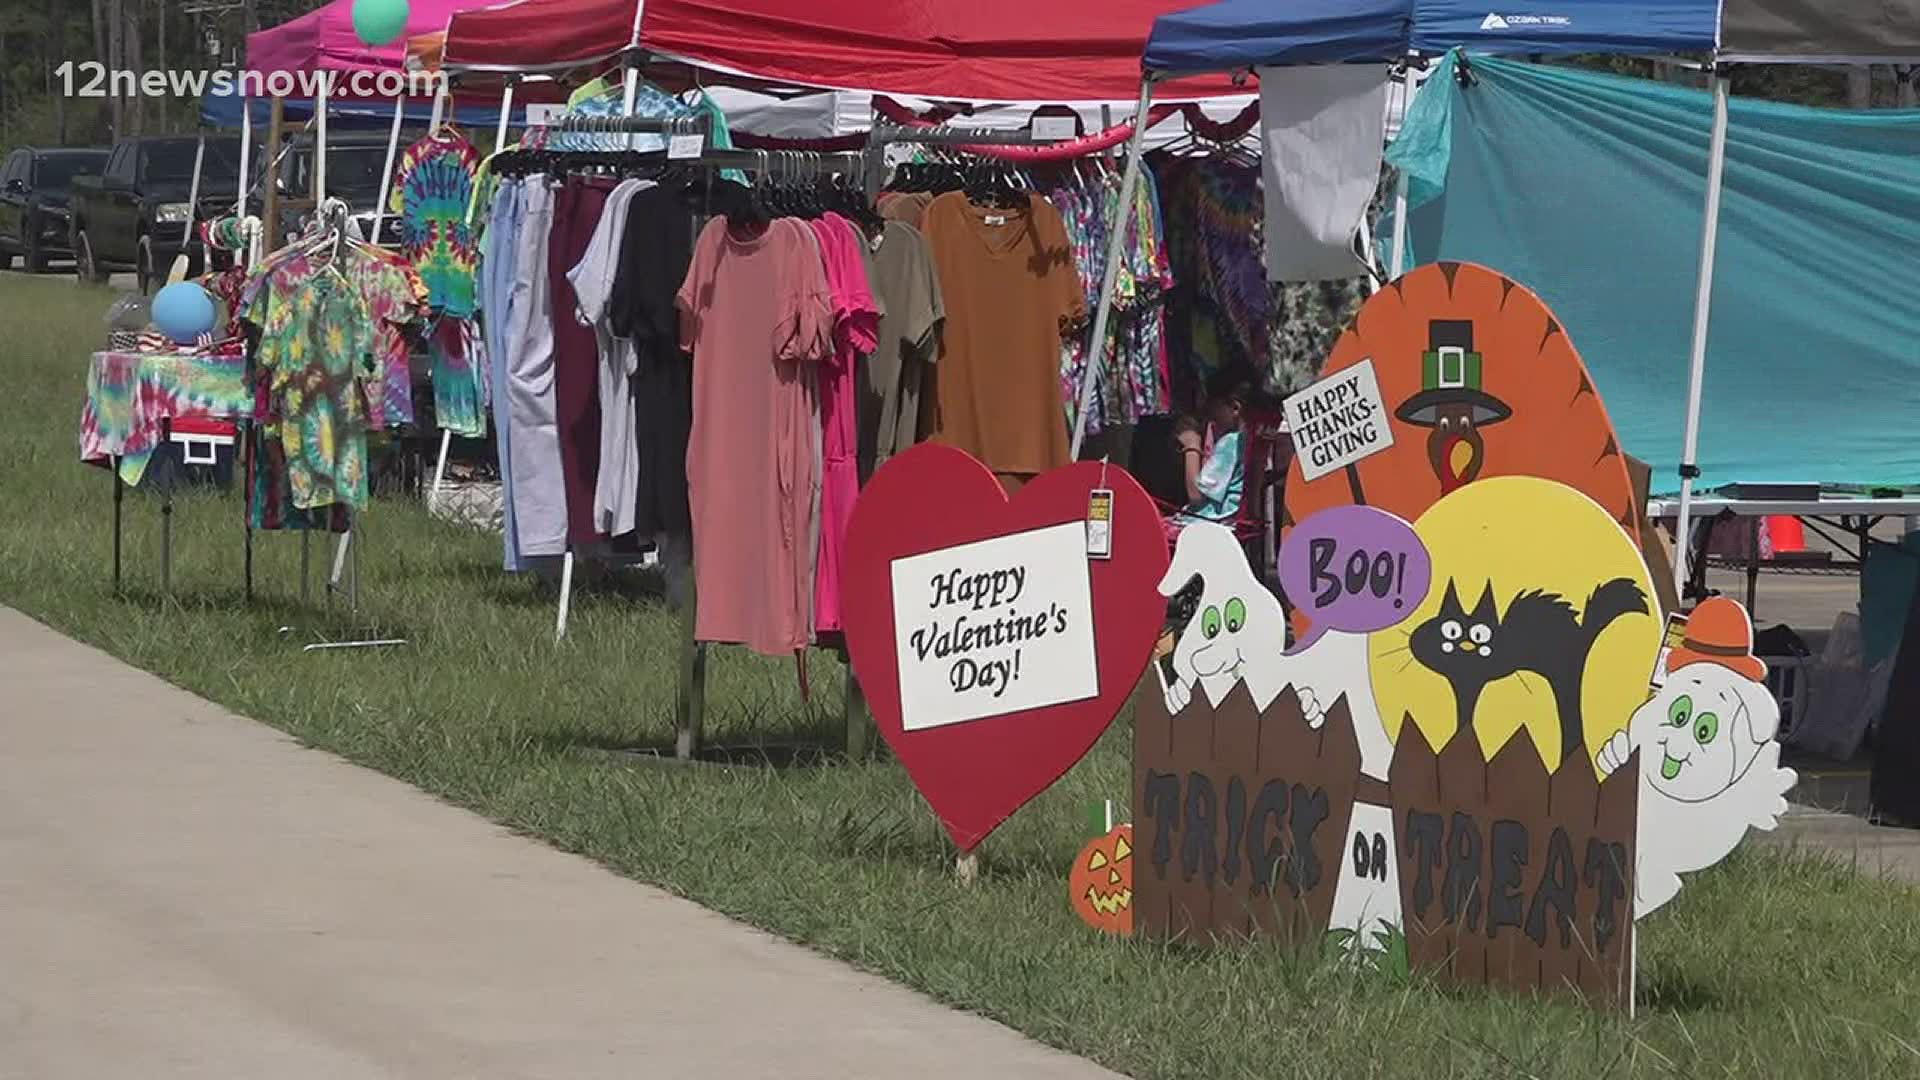 Vendors said staying afloat during the pandemic was a struggle, but events like Lumberton Trade Days are helping them recover from the financial hit.